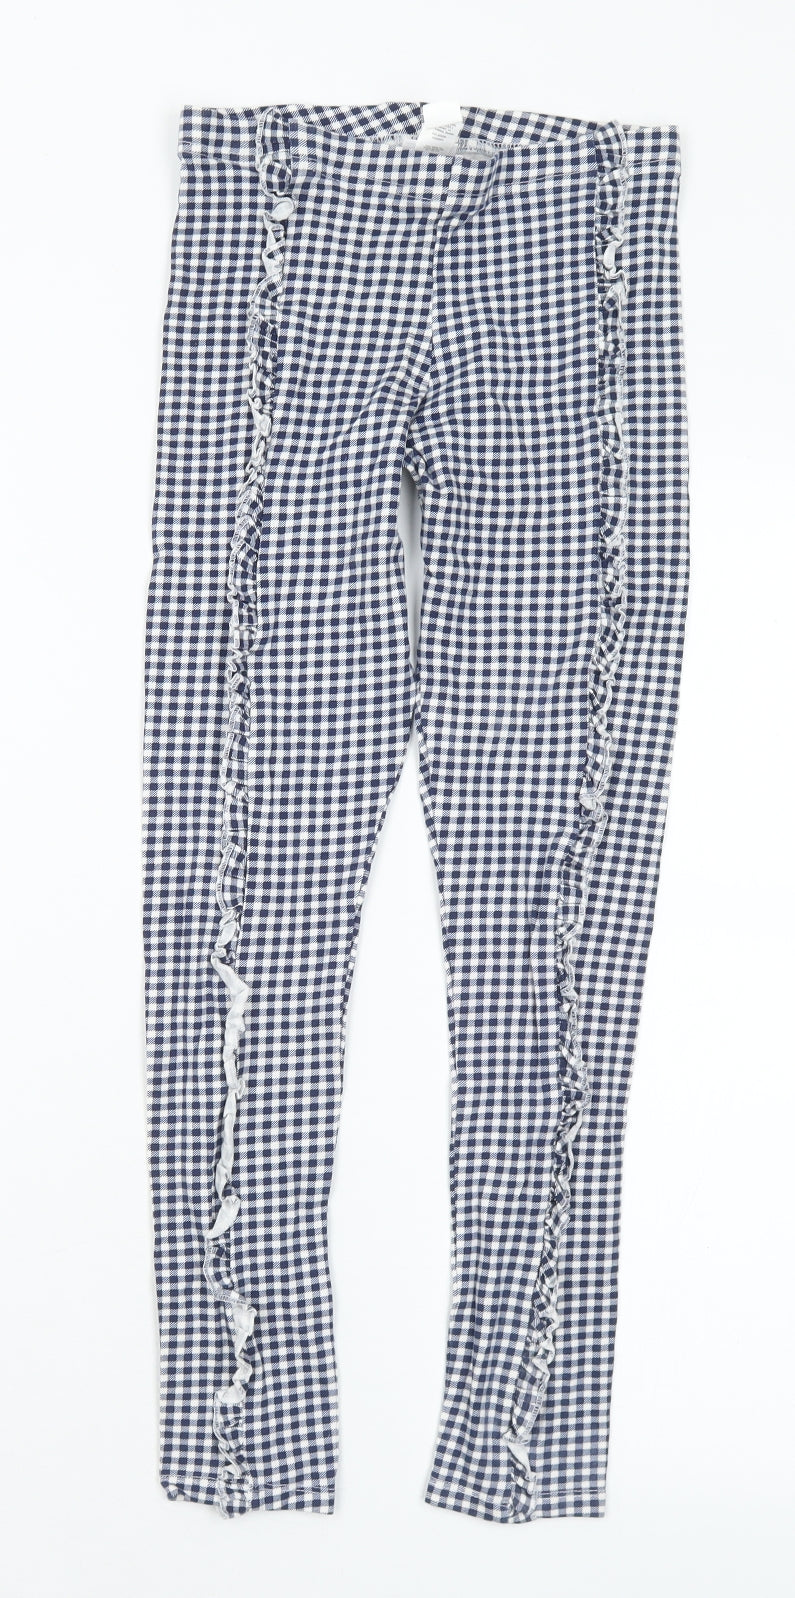 F&F Girls Blue Check Cotton Pedal Pusher Trousers Size 10-11 Years Regular